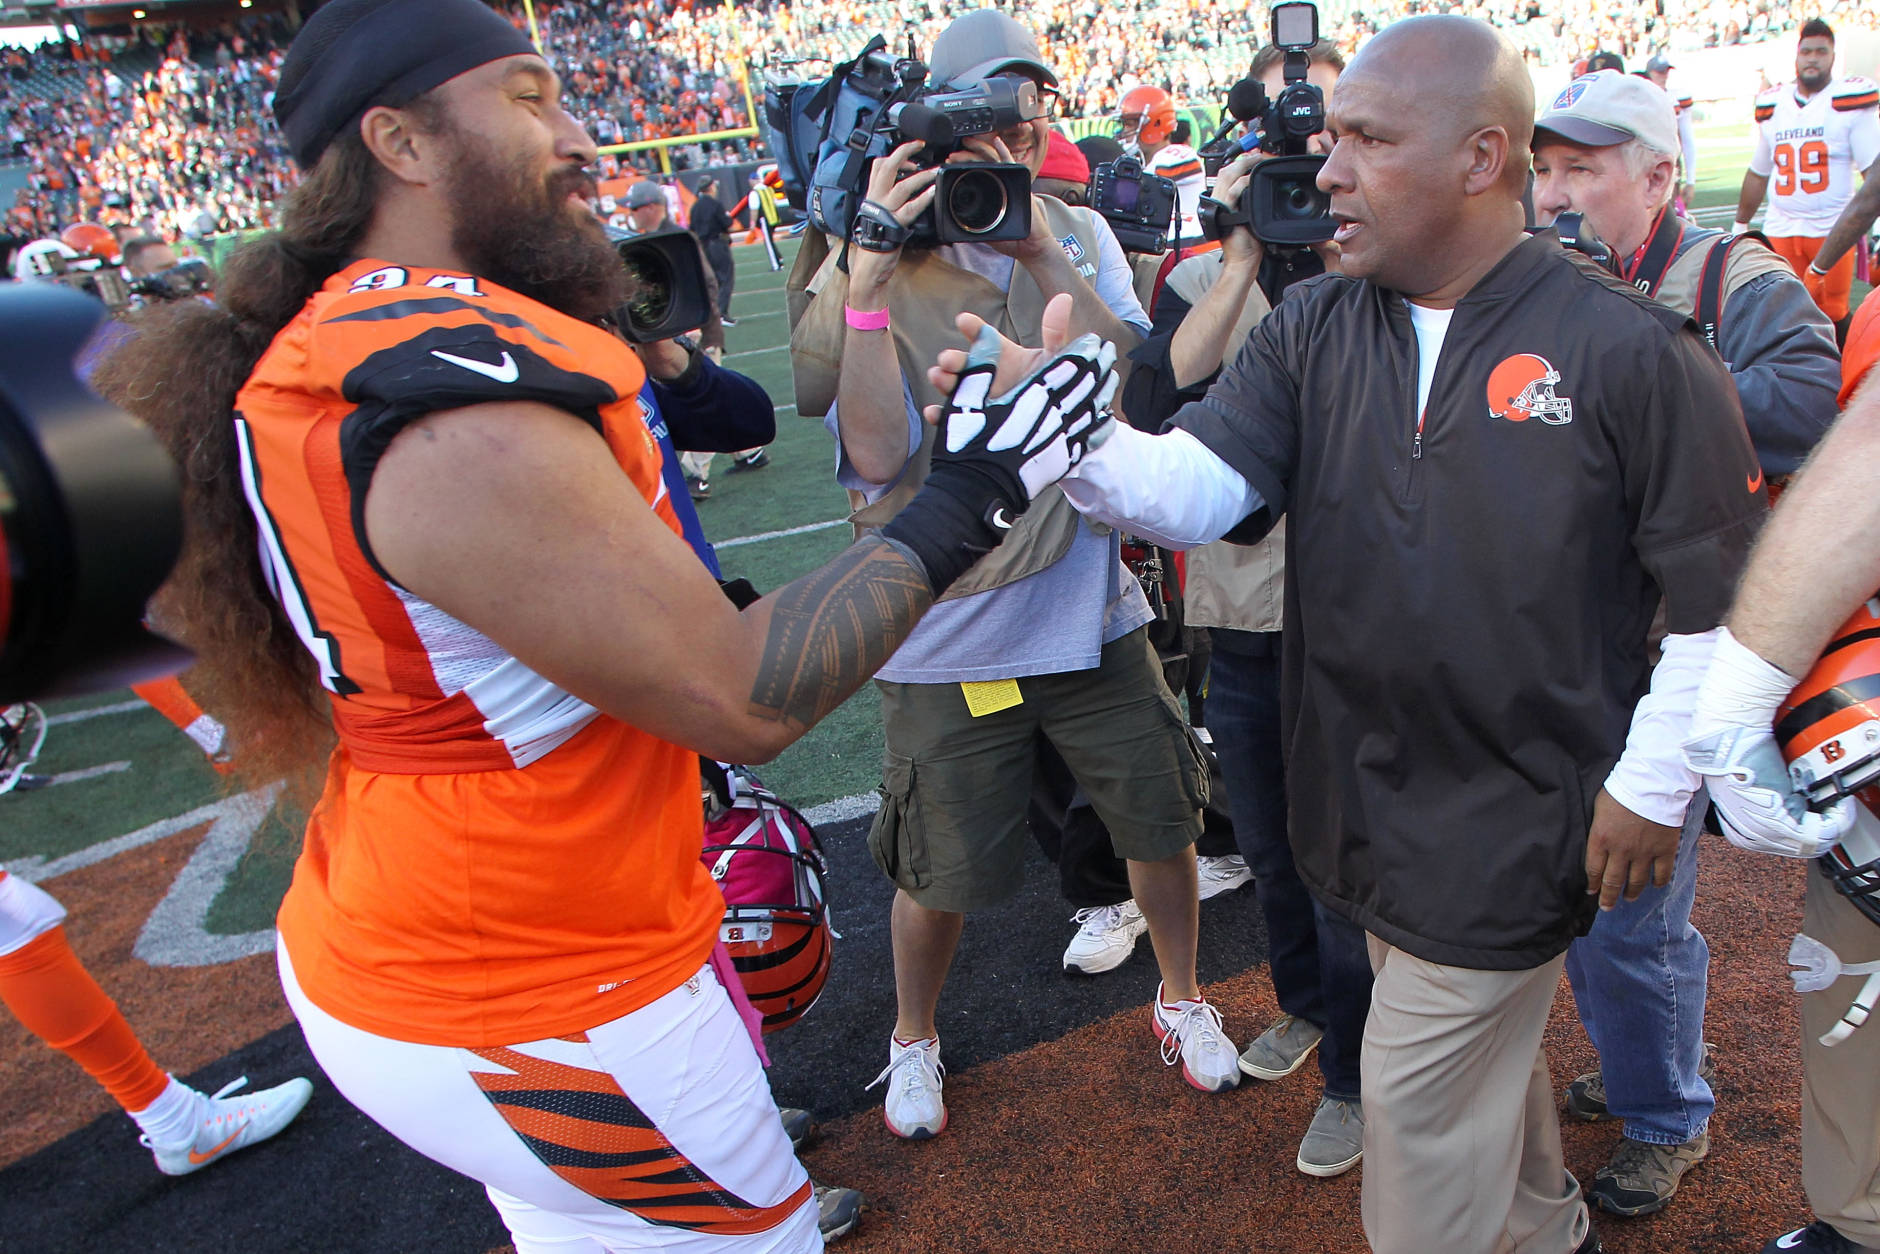 CINCINNATI, OH - OCTOBER 23:  Head Coach Hue Jackson of the Cleveland Browns congratulates Domata Peko #94 of the Cincinnati Bengals at the completion of the game at Paul Brown Stadium on October 23, 2016 in Cincinnati, Ohio. Cincinnati defeated Cleveland 31-17. (Photo by John Grieshop/Getty Images)